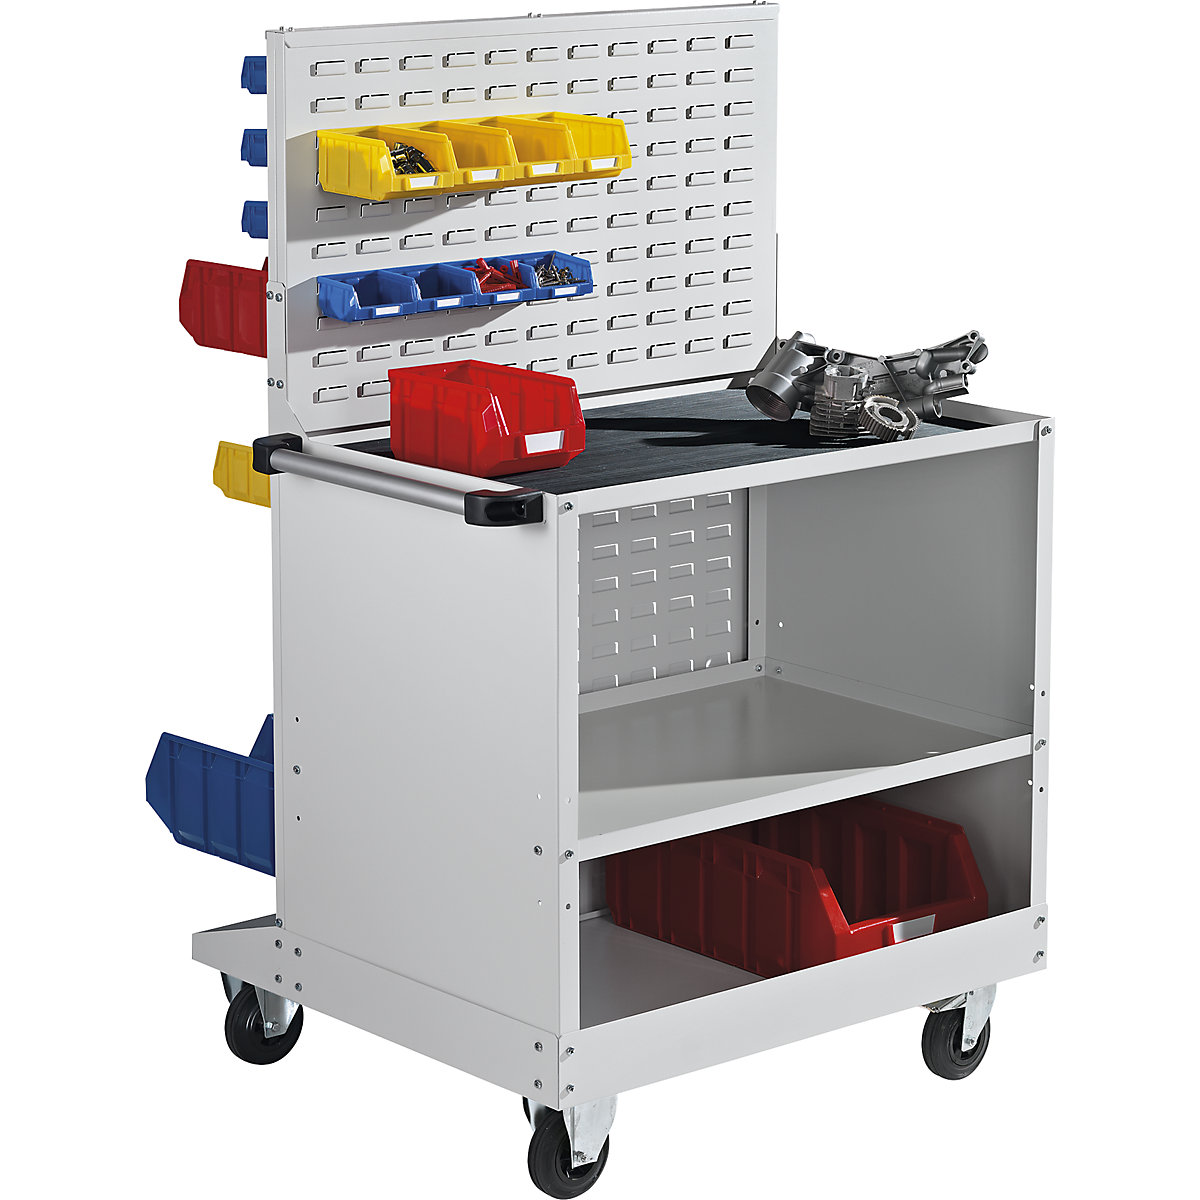 Mobile rack with open fronted storage bins and work surface